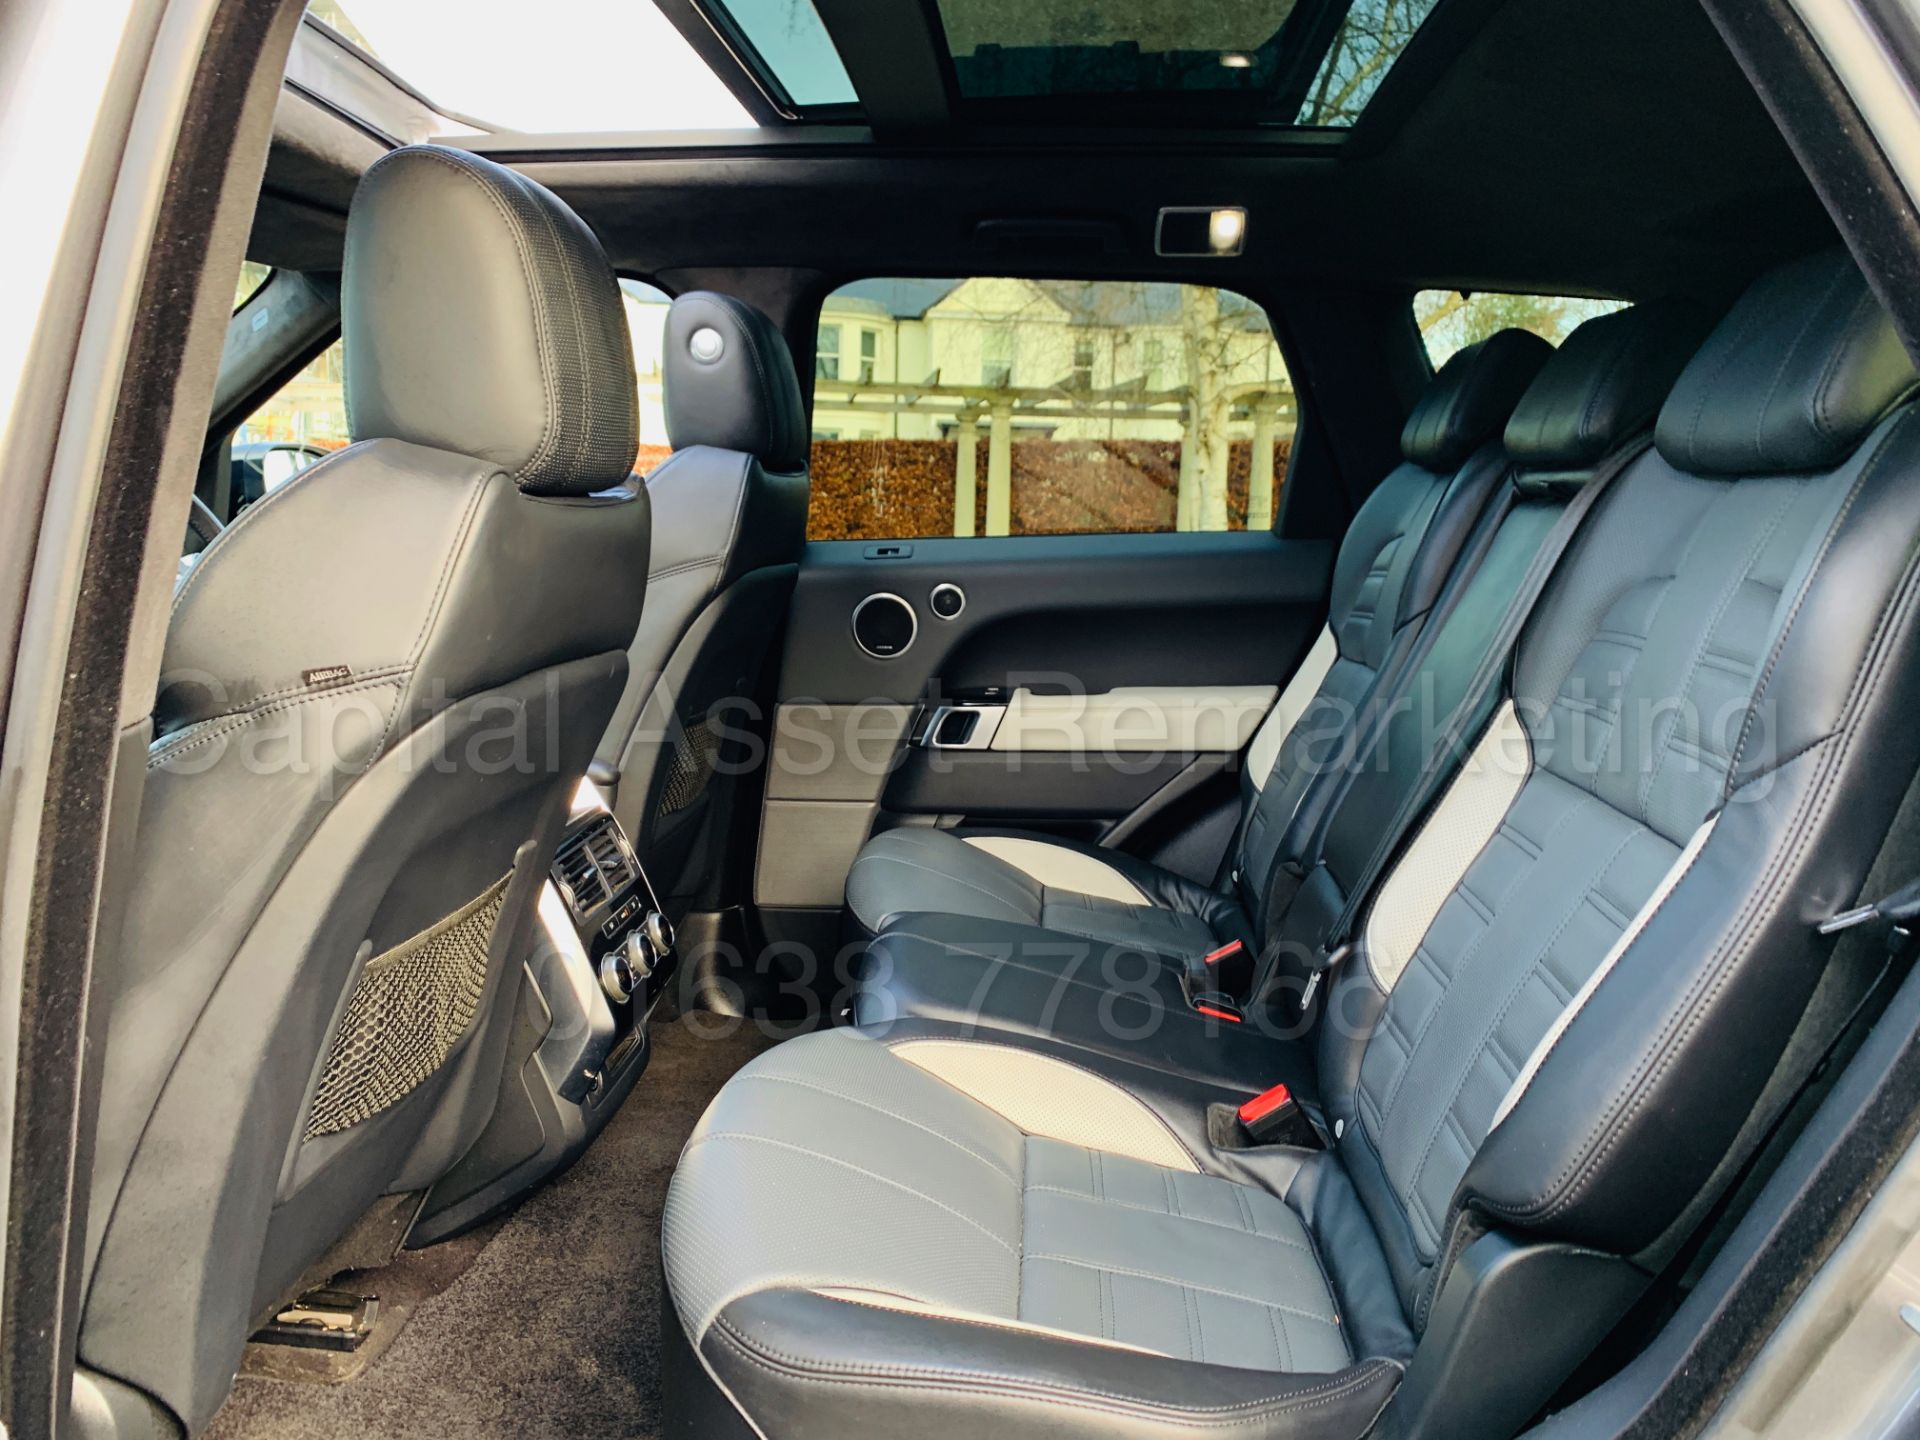 On Sale RANGE ROVER SPORT *AUTOBIOGRAPHY DYNAMIC* (2015 MODEL) '3.0 SDV6 - 8 SPEED AUTO' HIGE SPEC - Image 43 of 85